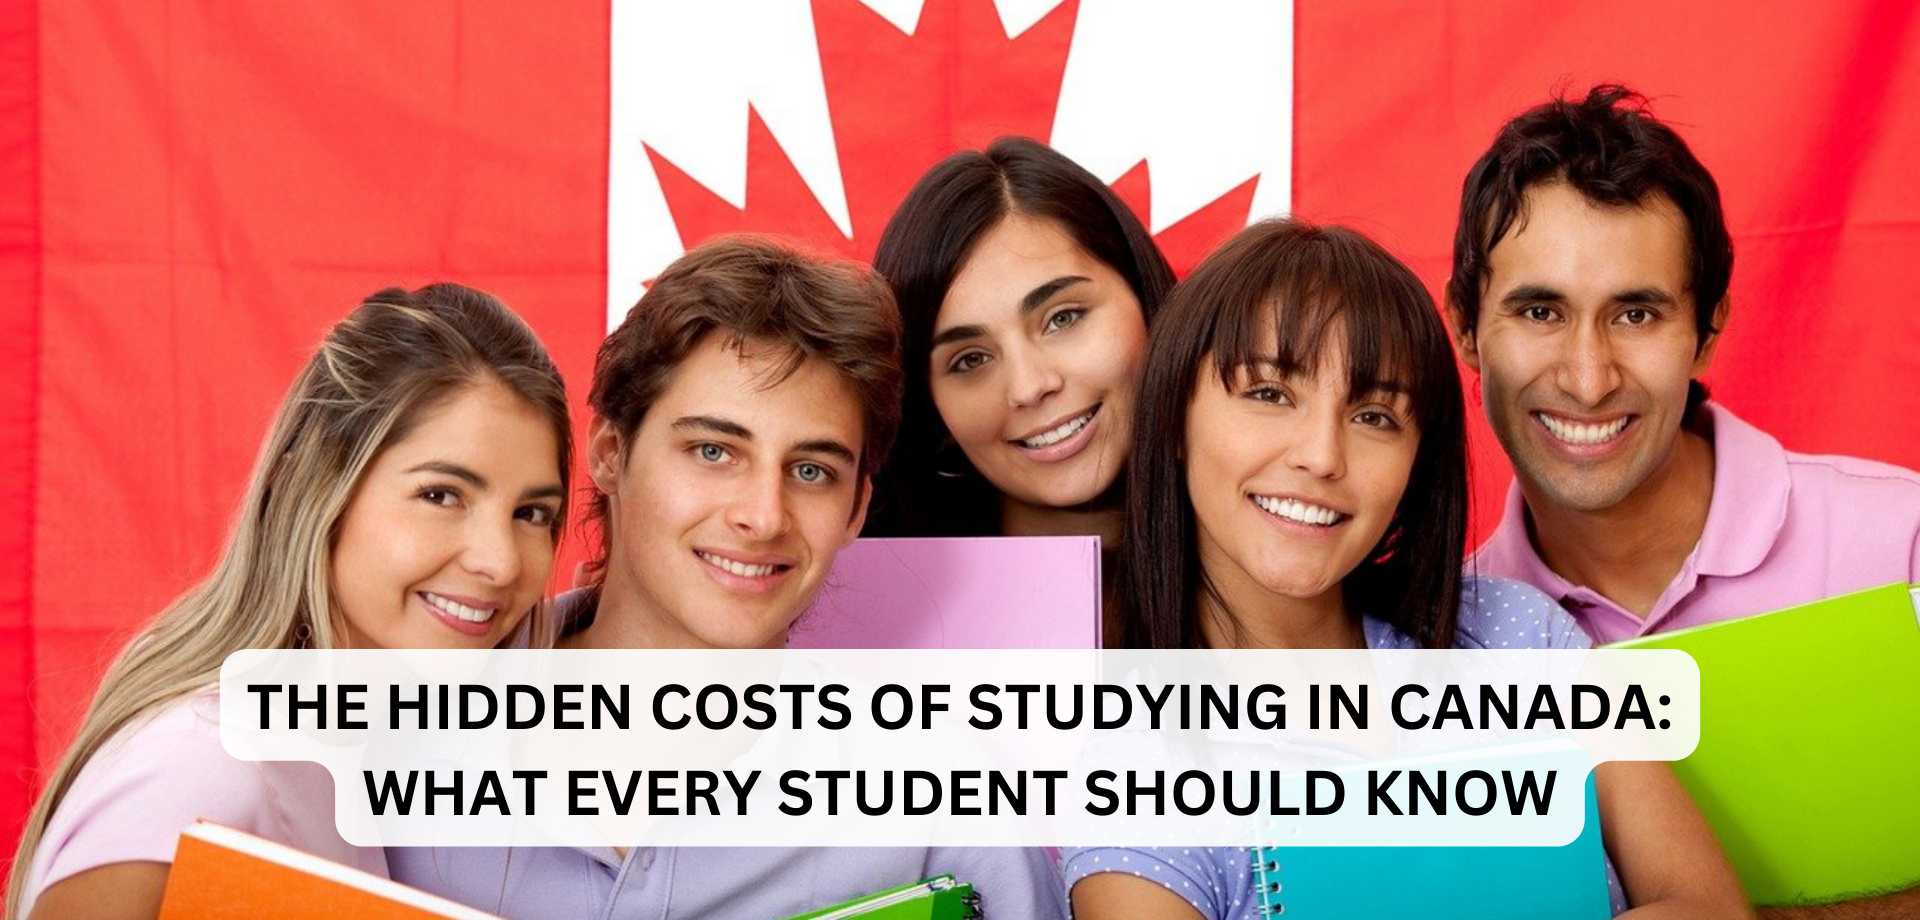 The Hidden Costs of Studying in Canada: What Every Student Should Know